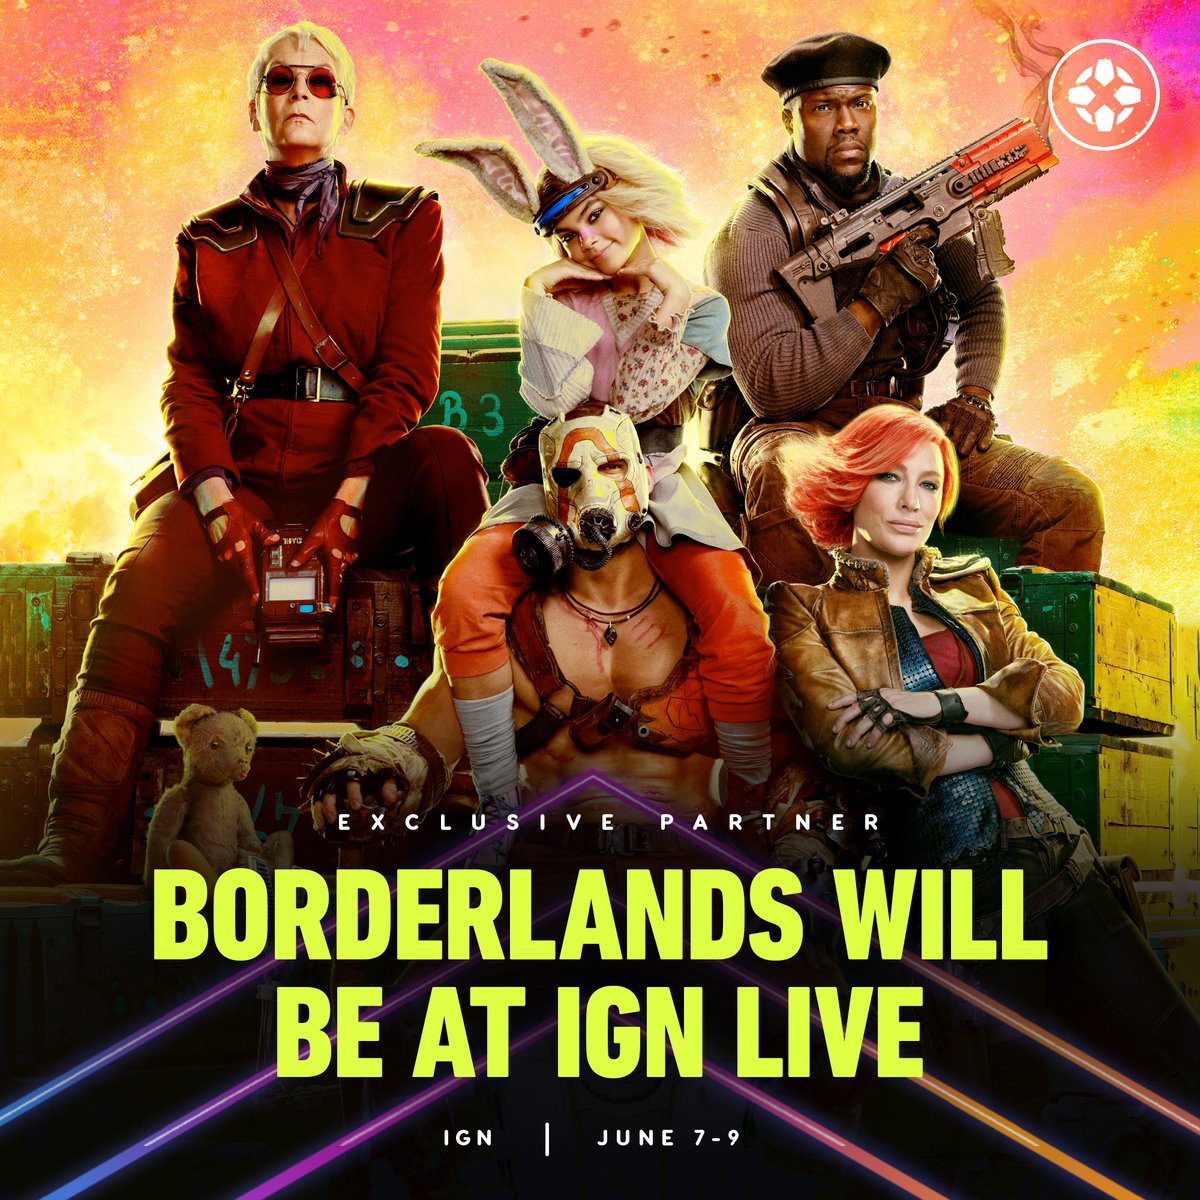 The crew from @Lionsgate's @BorderlandsFilm is stopping by #IGNLive! Head over to IGN.com/live to snag tickets for your chance to see @ArianaG, @big9nasty, and director @eliroth dive deep into the film and show a never-before-seen sneak peek!